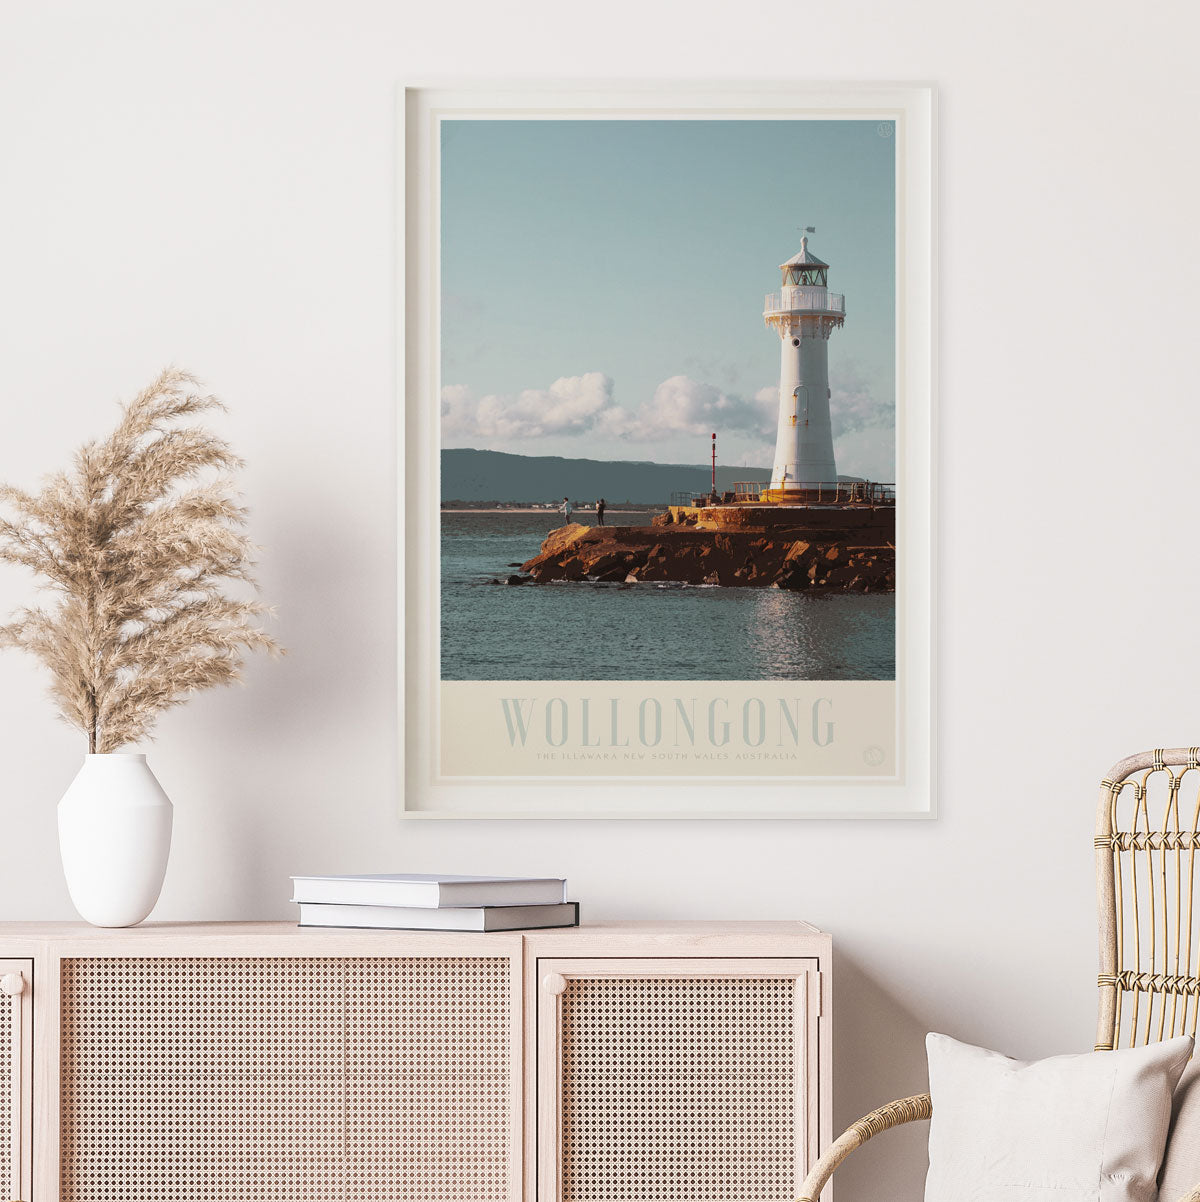 Wollongong NSW vintage retro travel print by Places We Luv